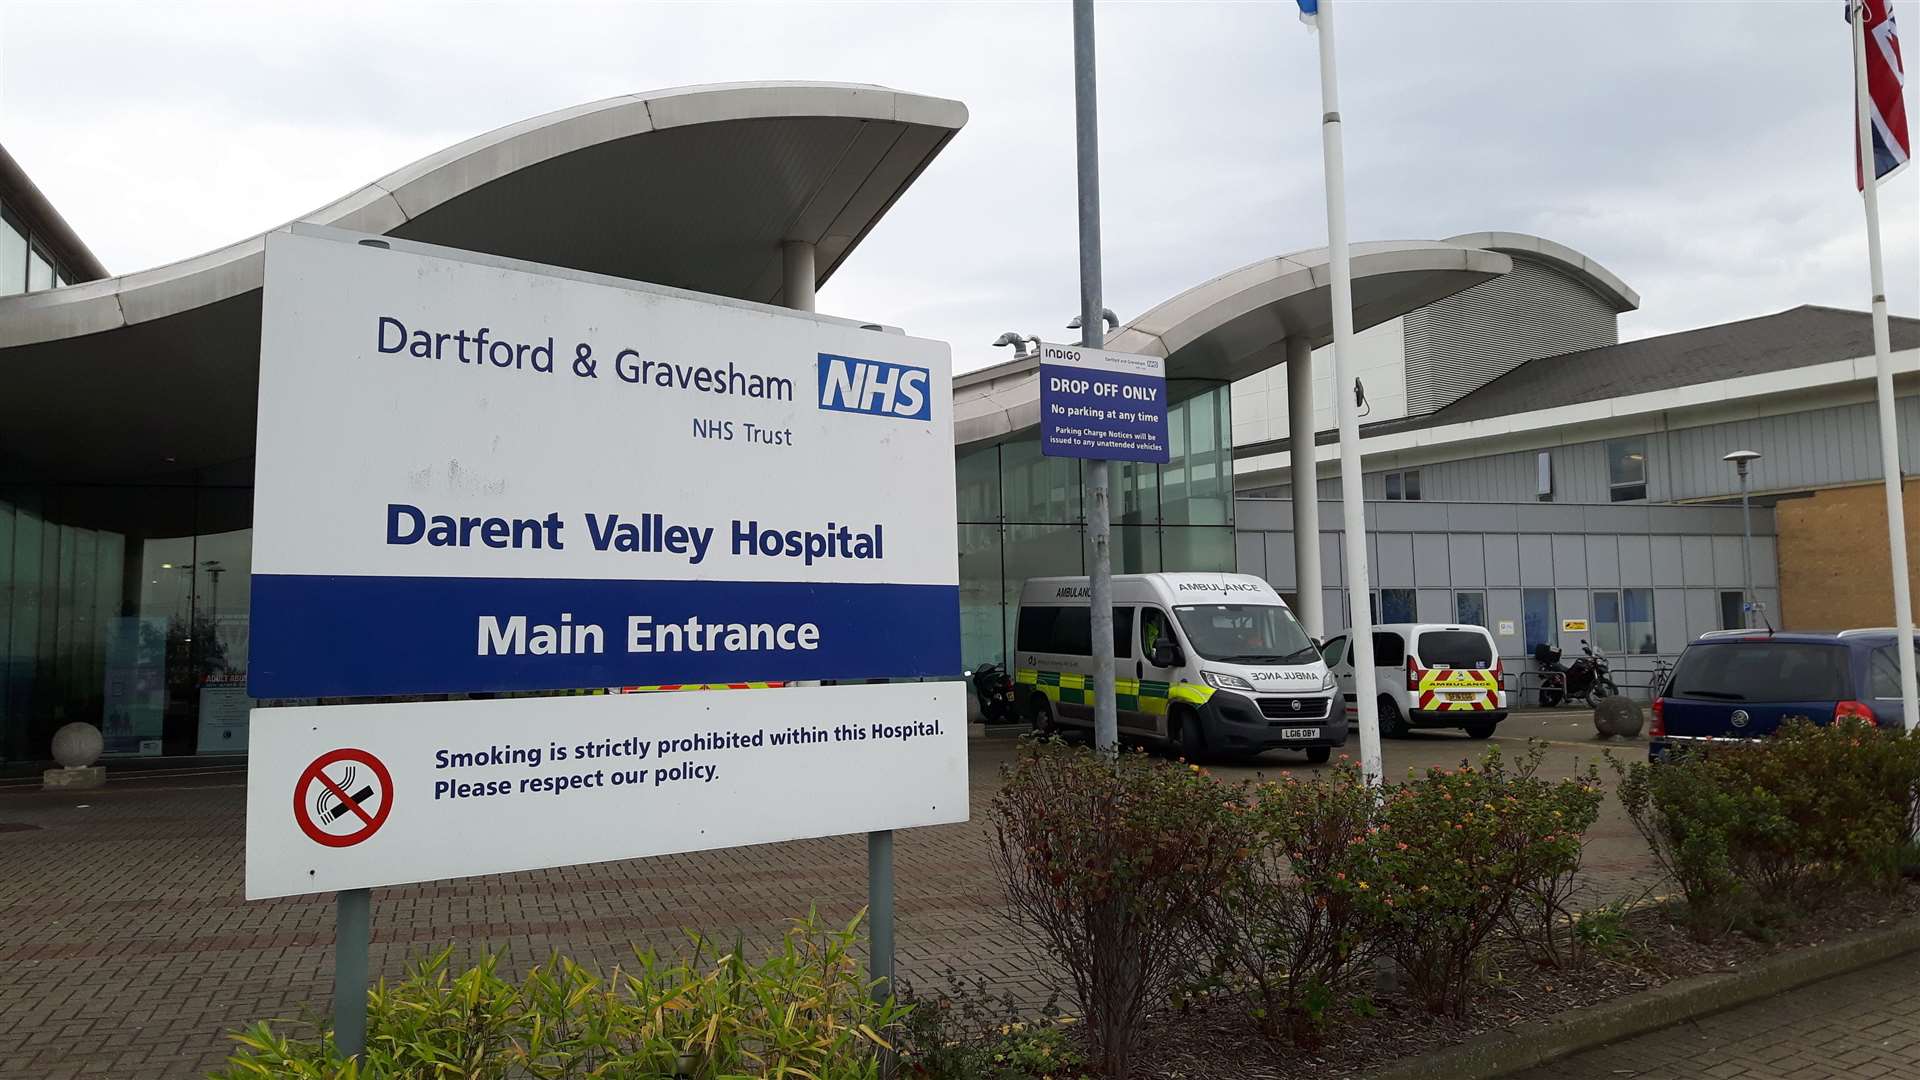 Under the plan approved by KCC, one of the stroke units would be built at Darent Valley Hospital in Dartford